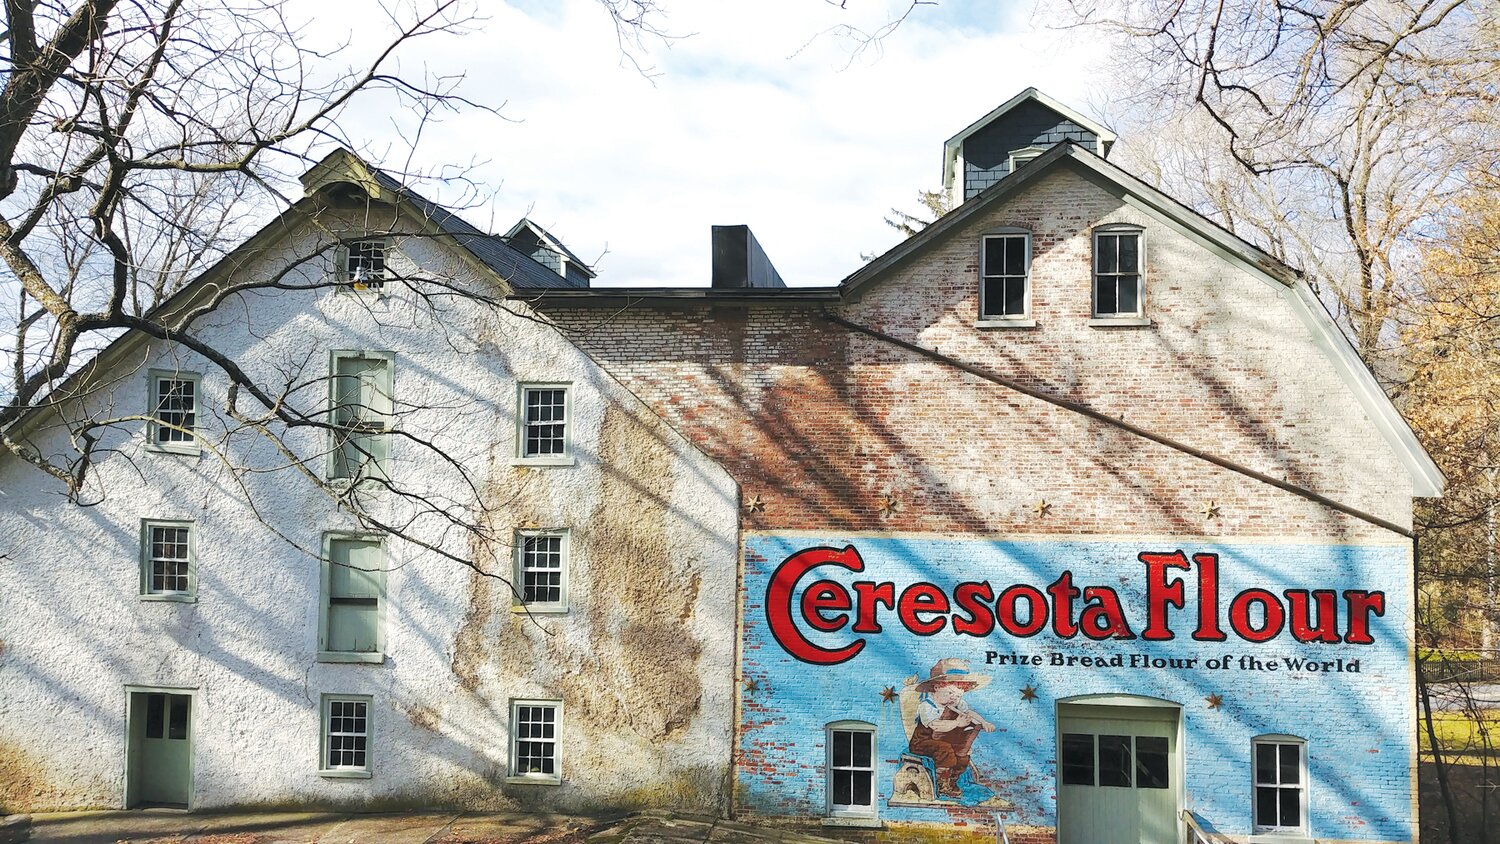 The 1912 Ceresota Flour Mural was restored by Durham Historical Society in 2003.